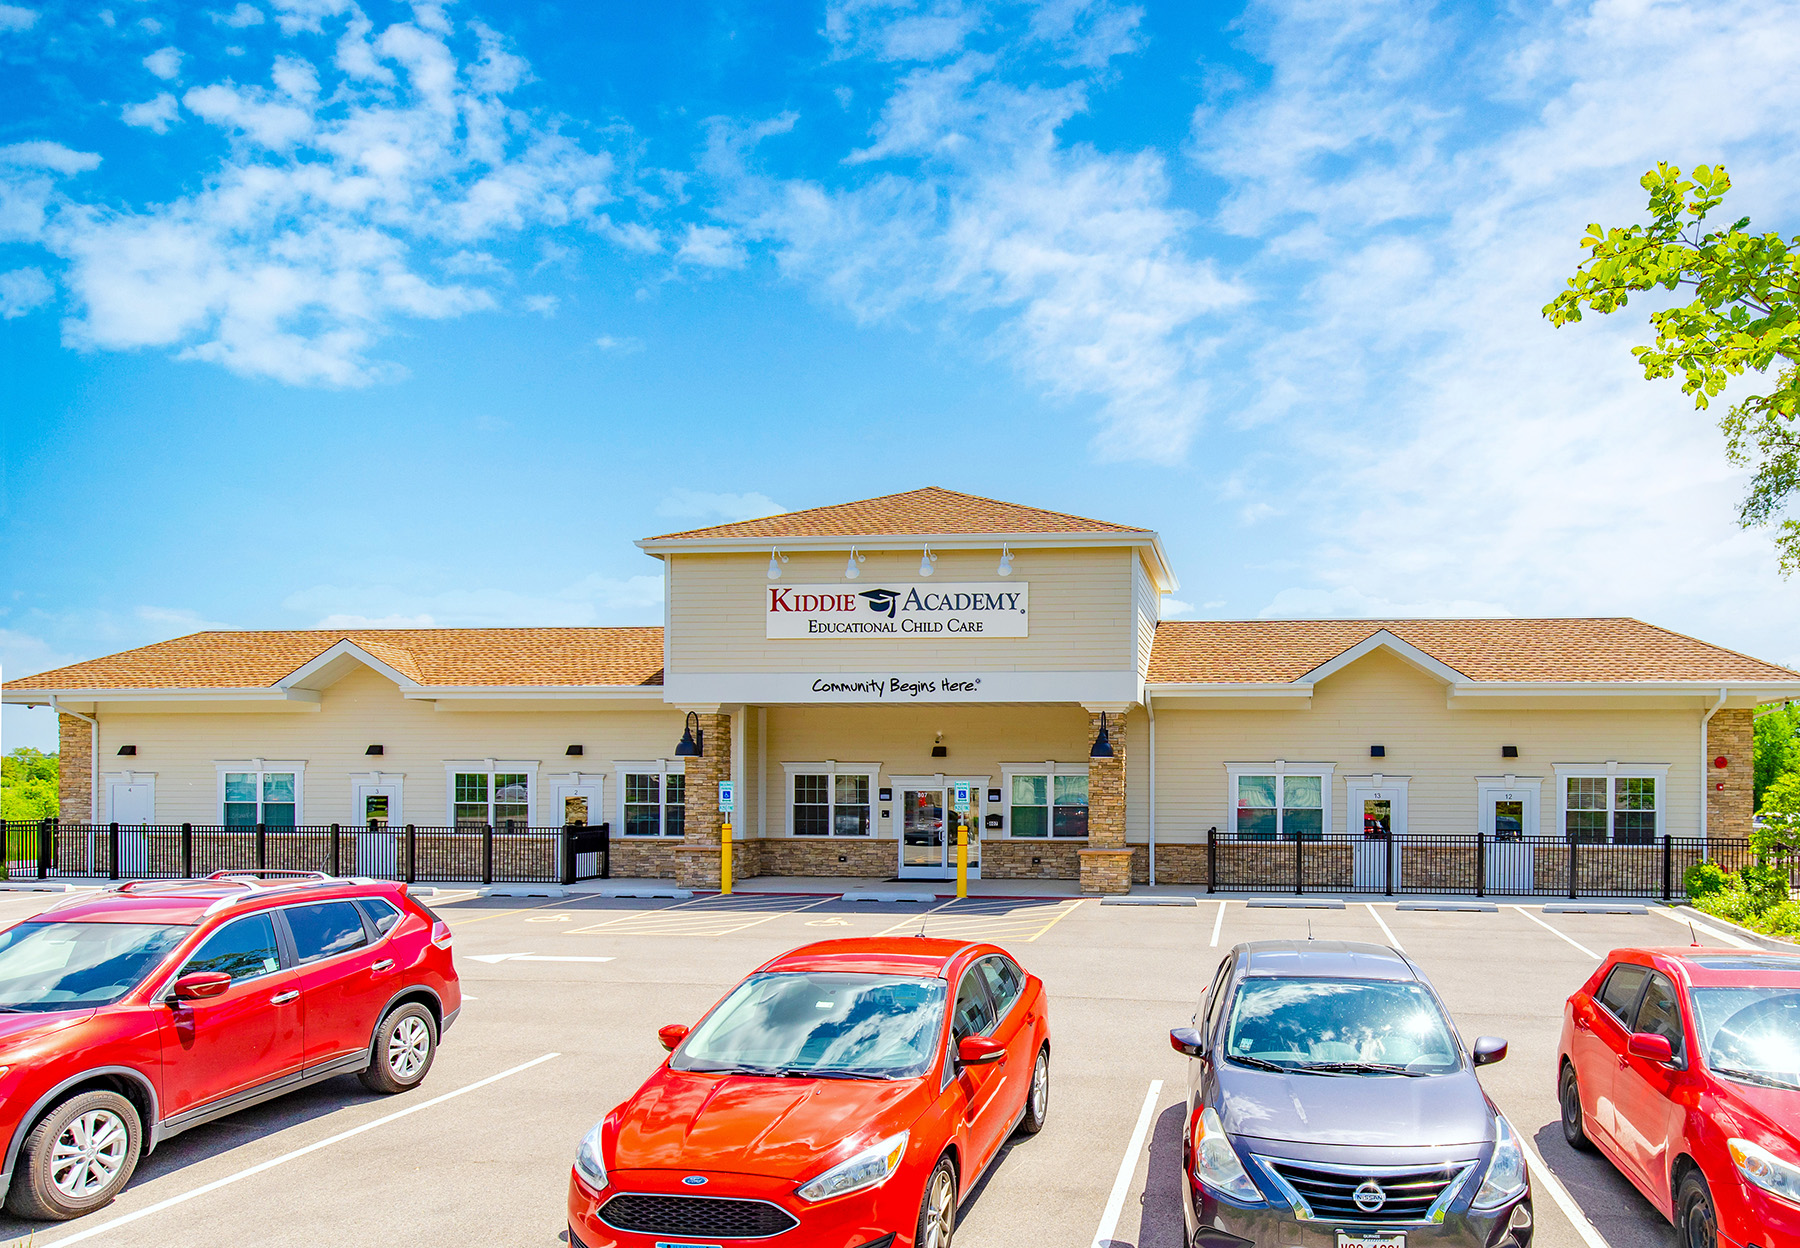 Hanley Investment Group Arranges Sale of Brand New Kiddie Academy in Chicago Metro for $3.73 Million